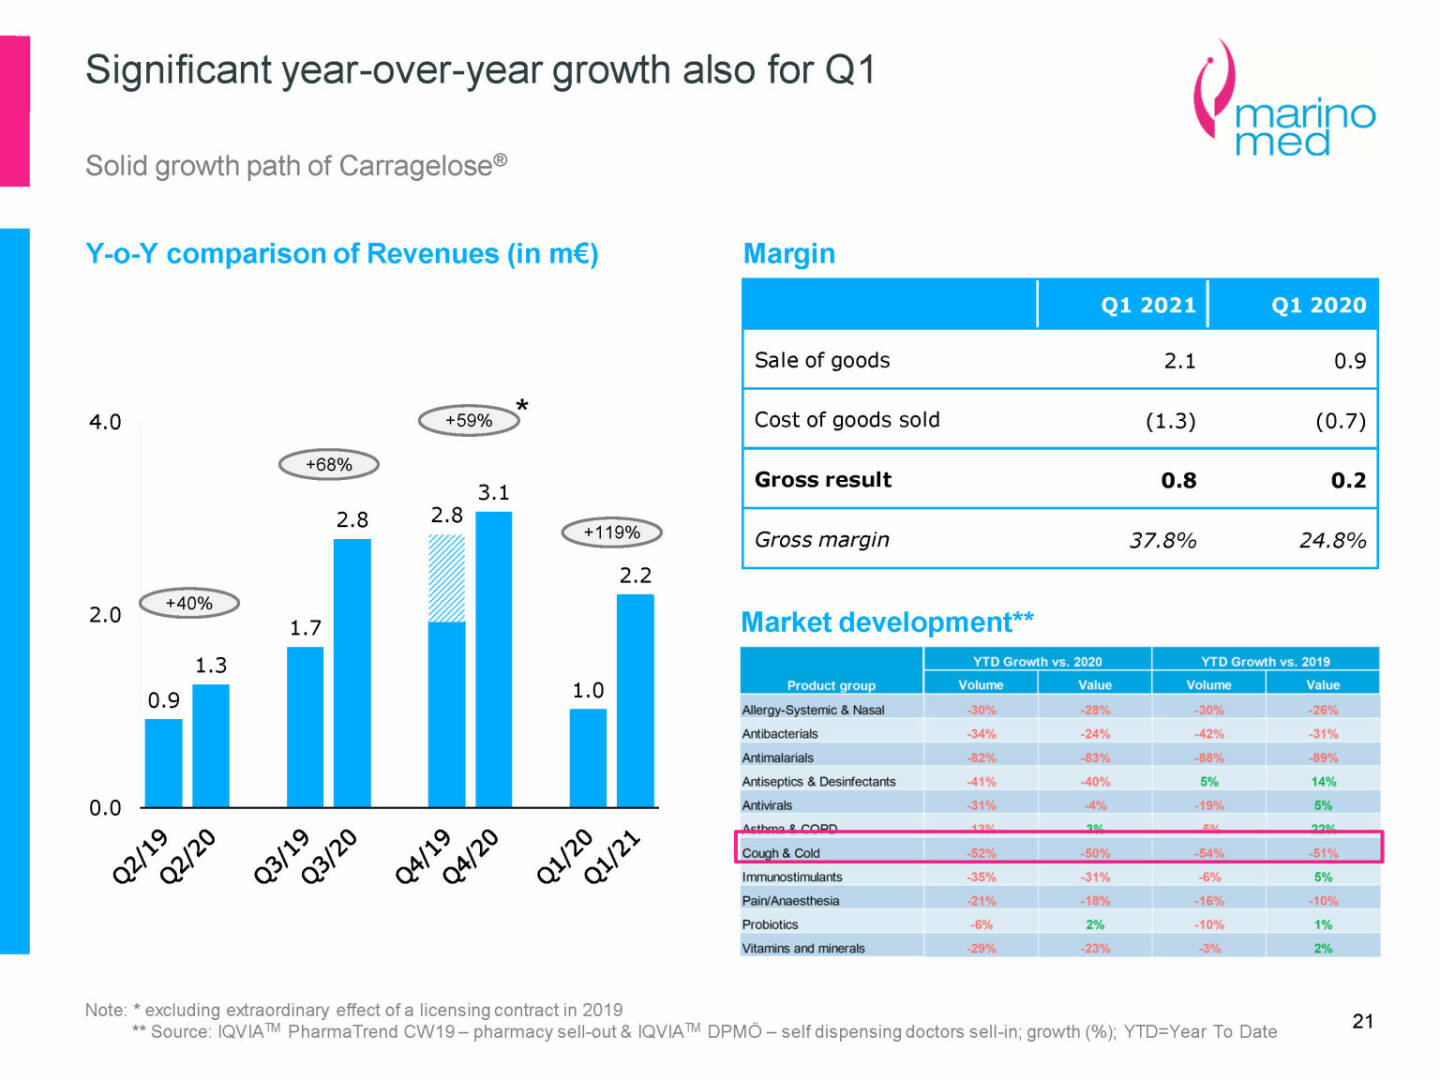 Marinomed - Significant year-over-year growth also for Q1